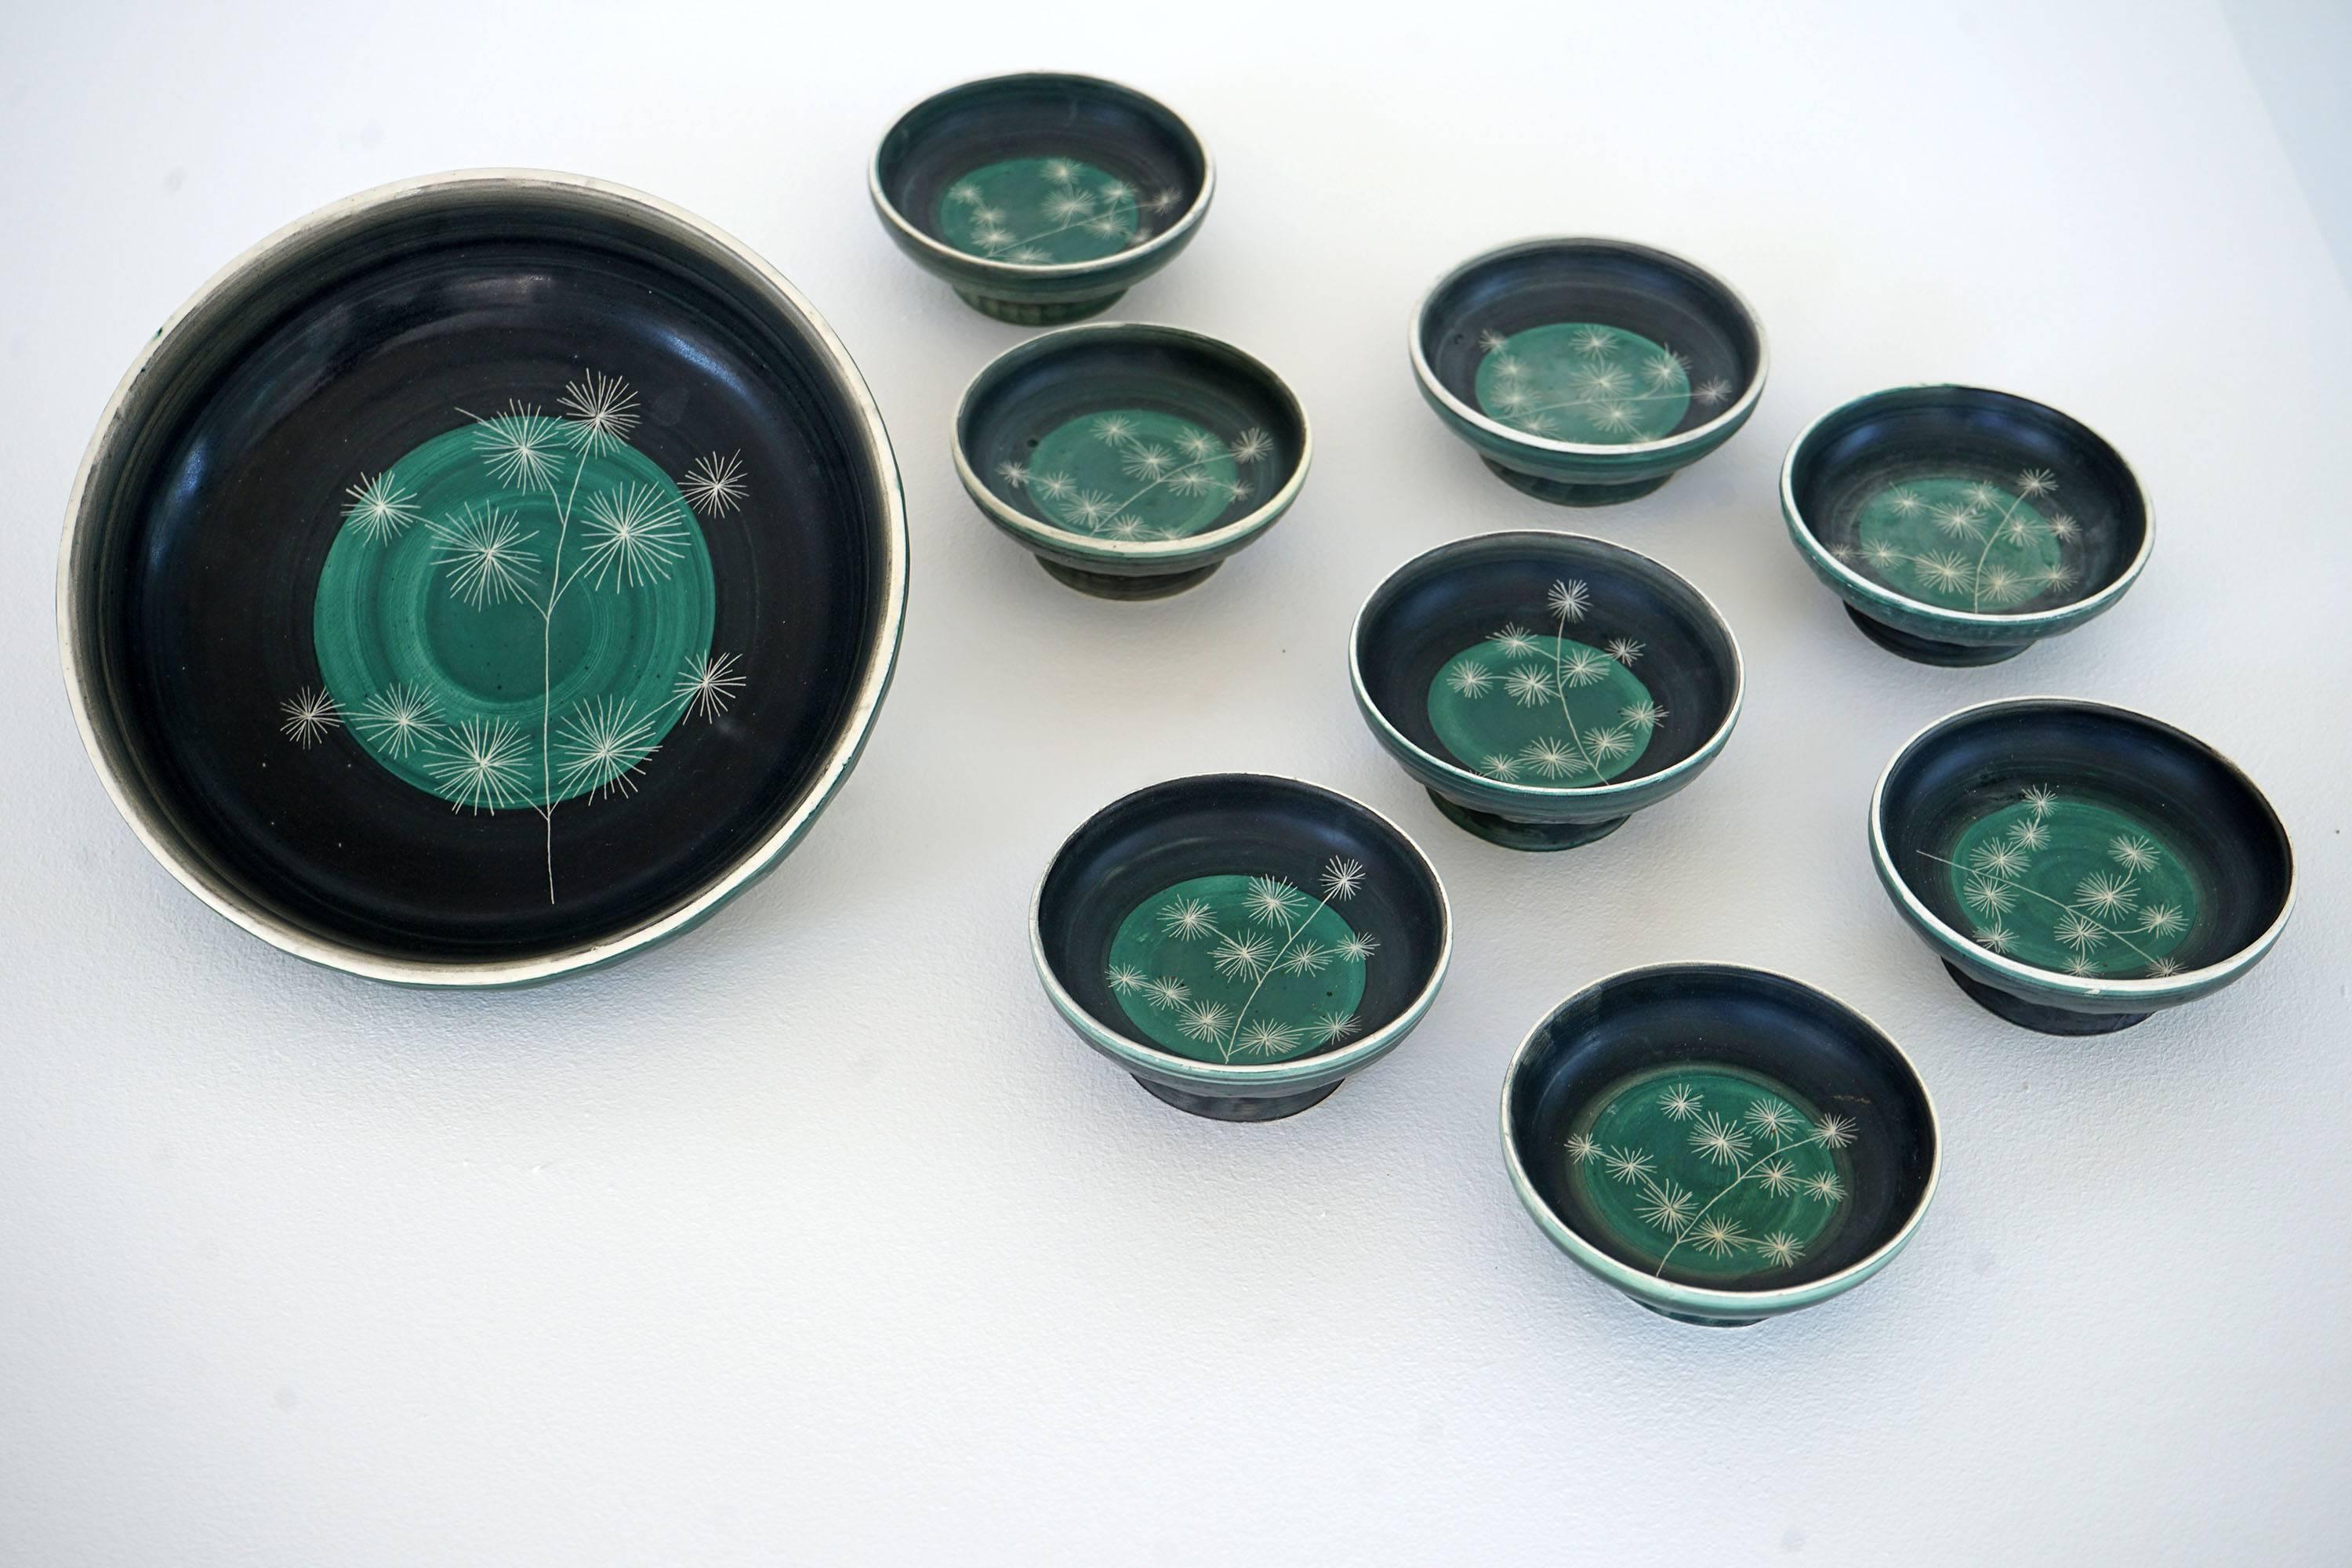 French Set of Handmade Ceramic Bowls by Tapis Vert in Vallauris, 1950s For Sale